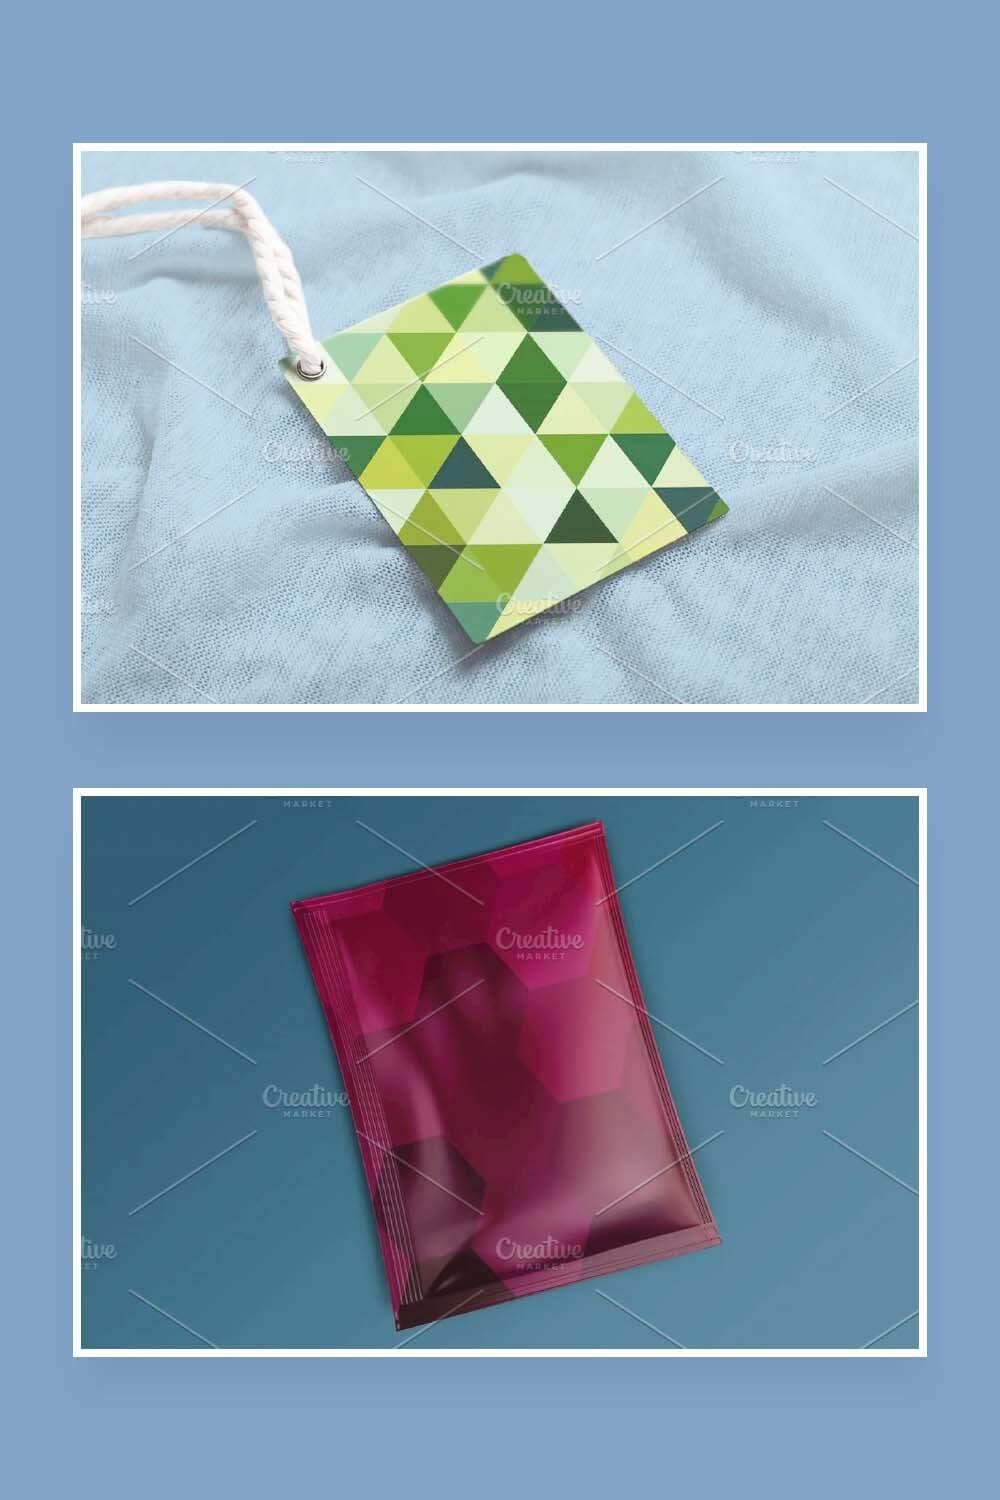 Drawstring card with gradation of green triangles and burgundy packaging with honeycombs.